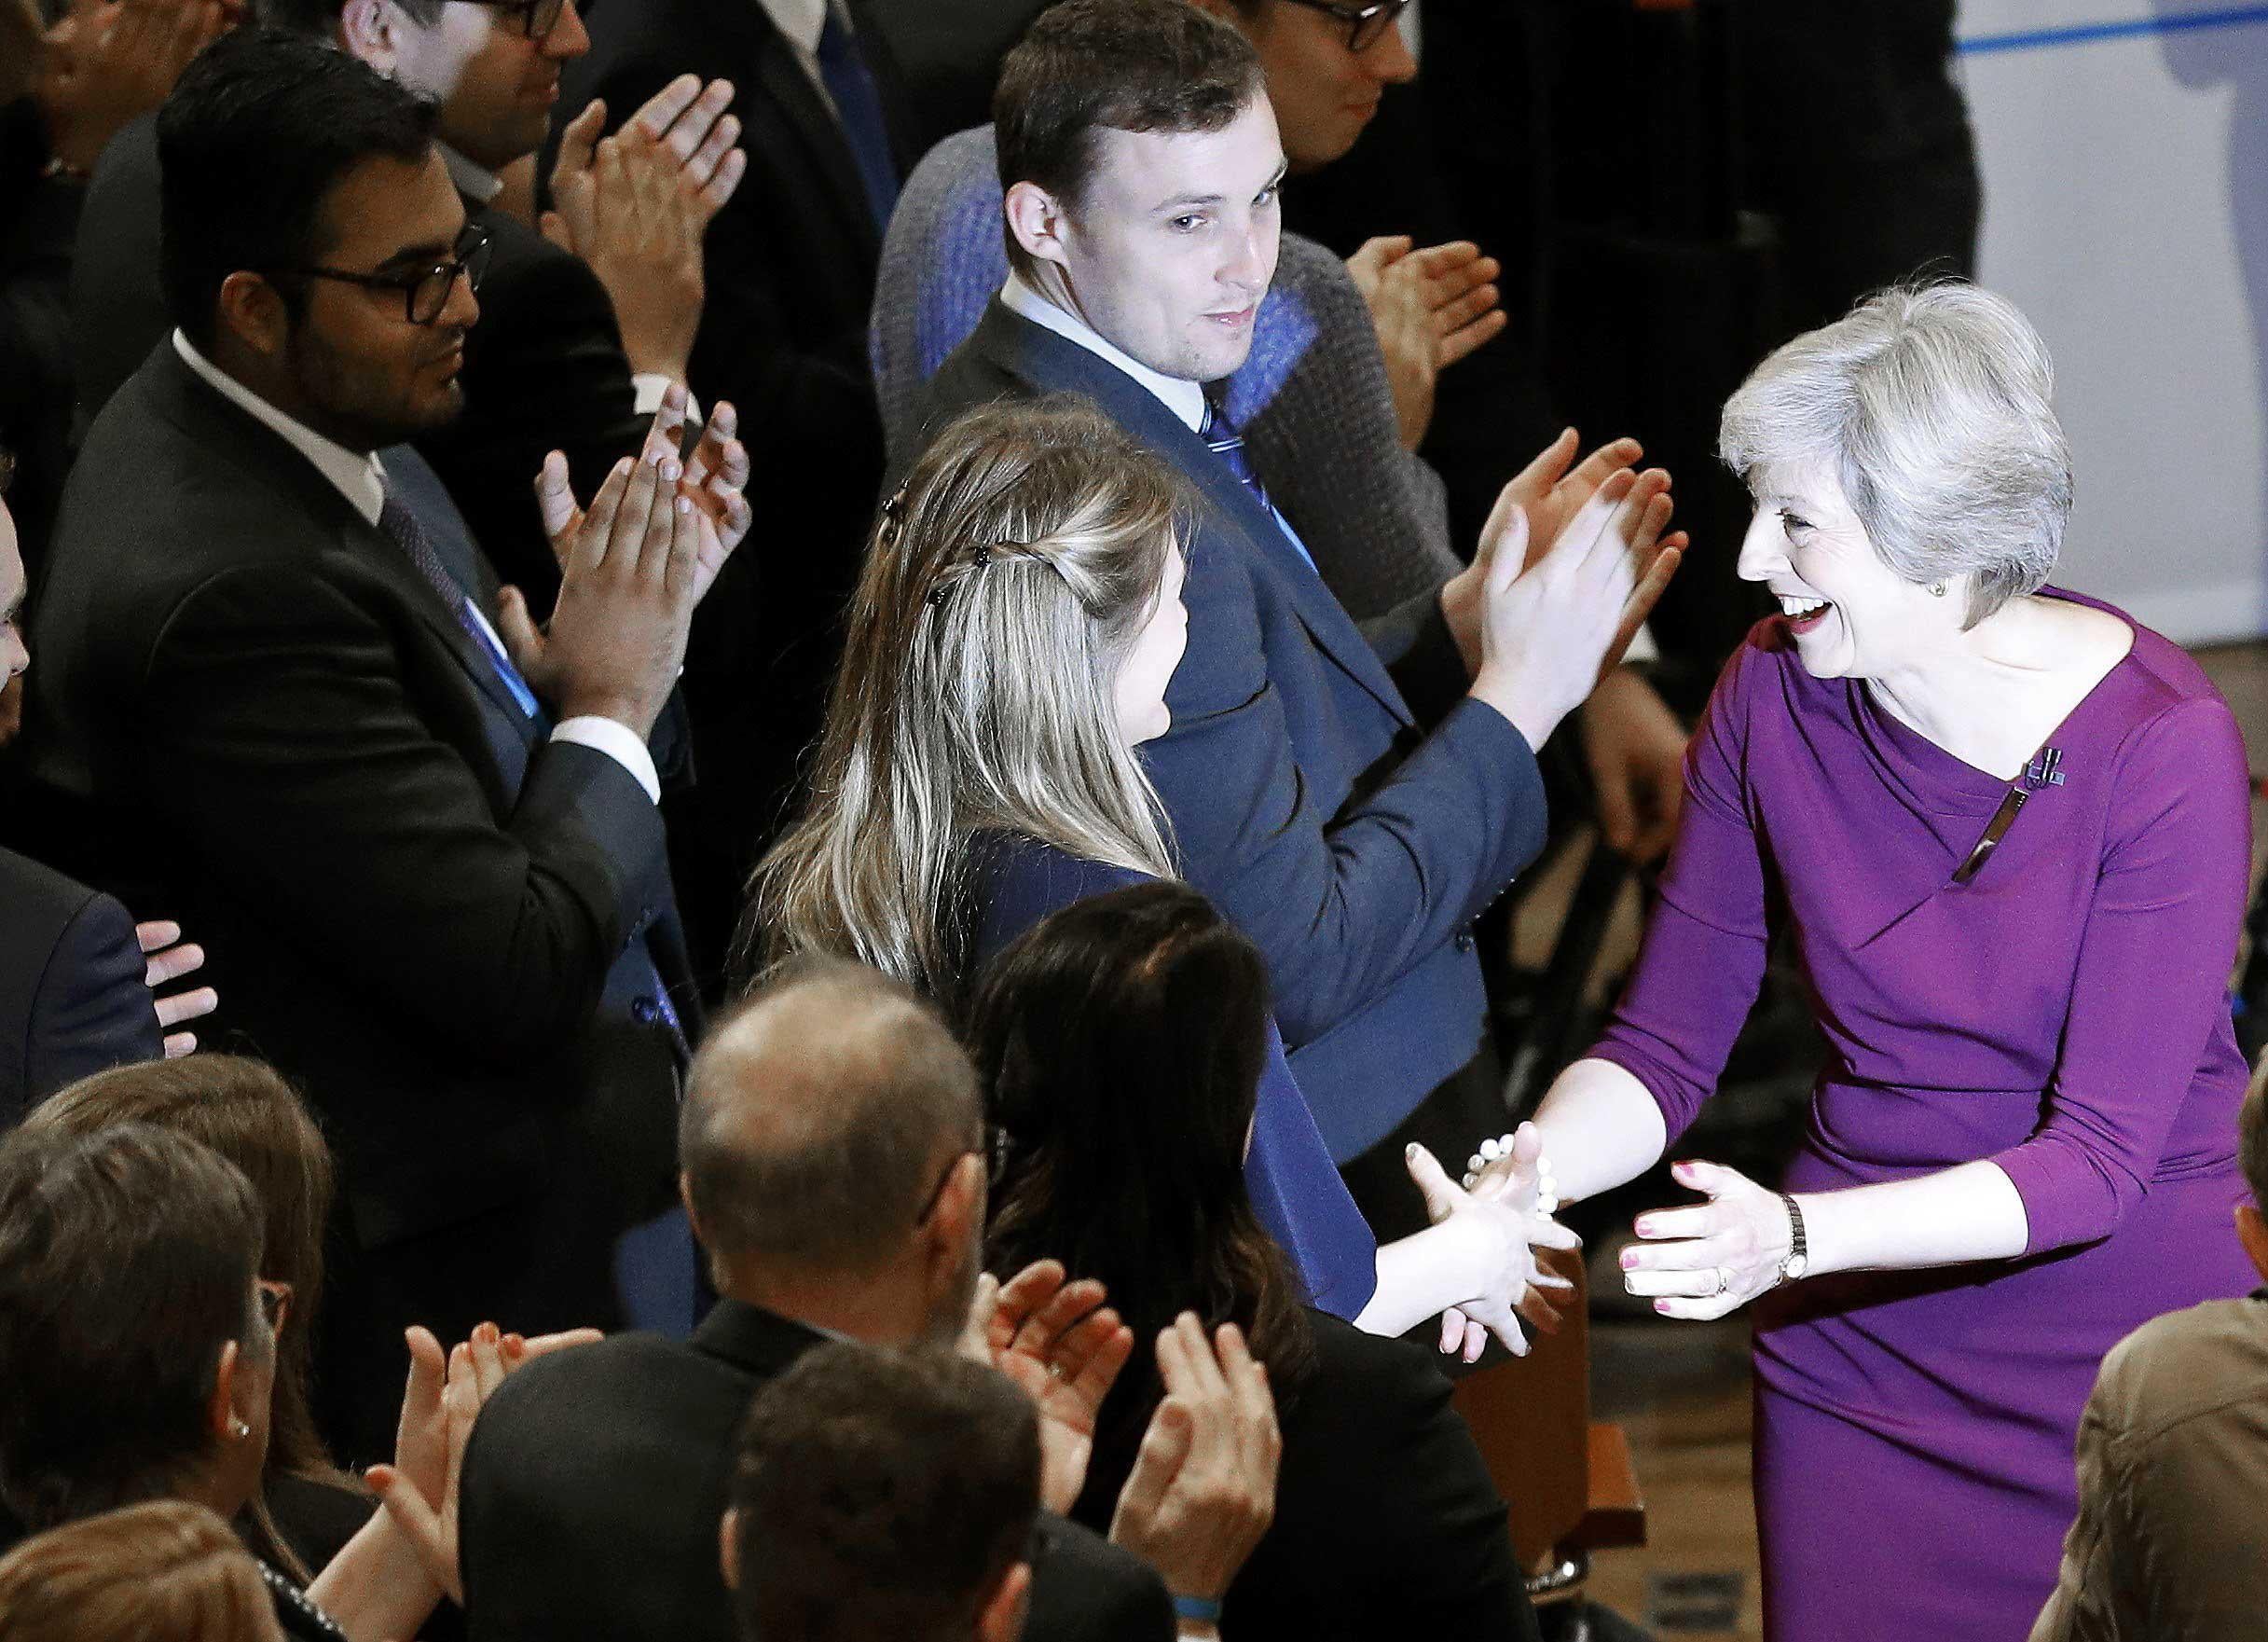 Britain's Prime Minister Theresa May shakes hands with delegates as she leaves the stage after giving her speech on the final day of the annual Conservative Party Conference in Birmingham